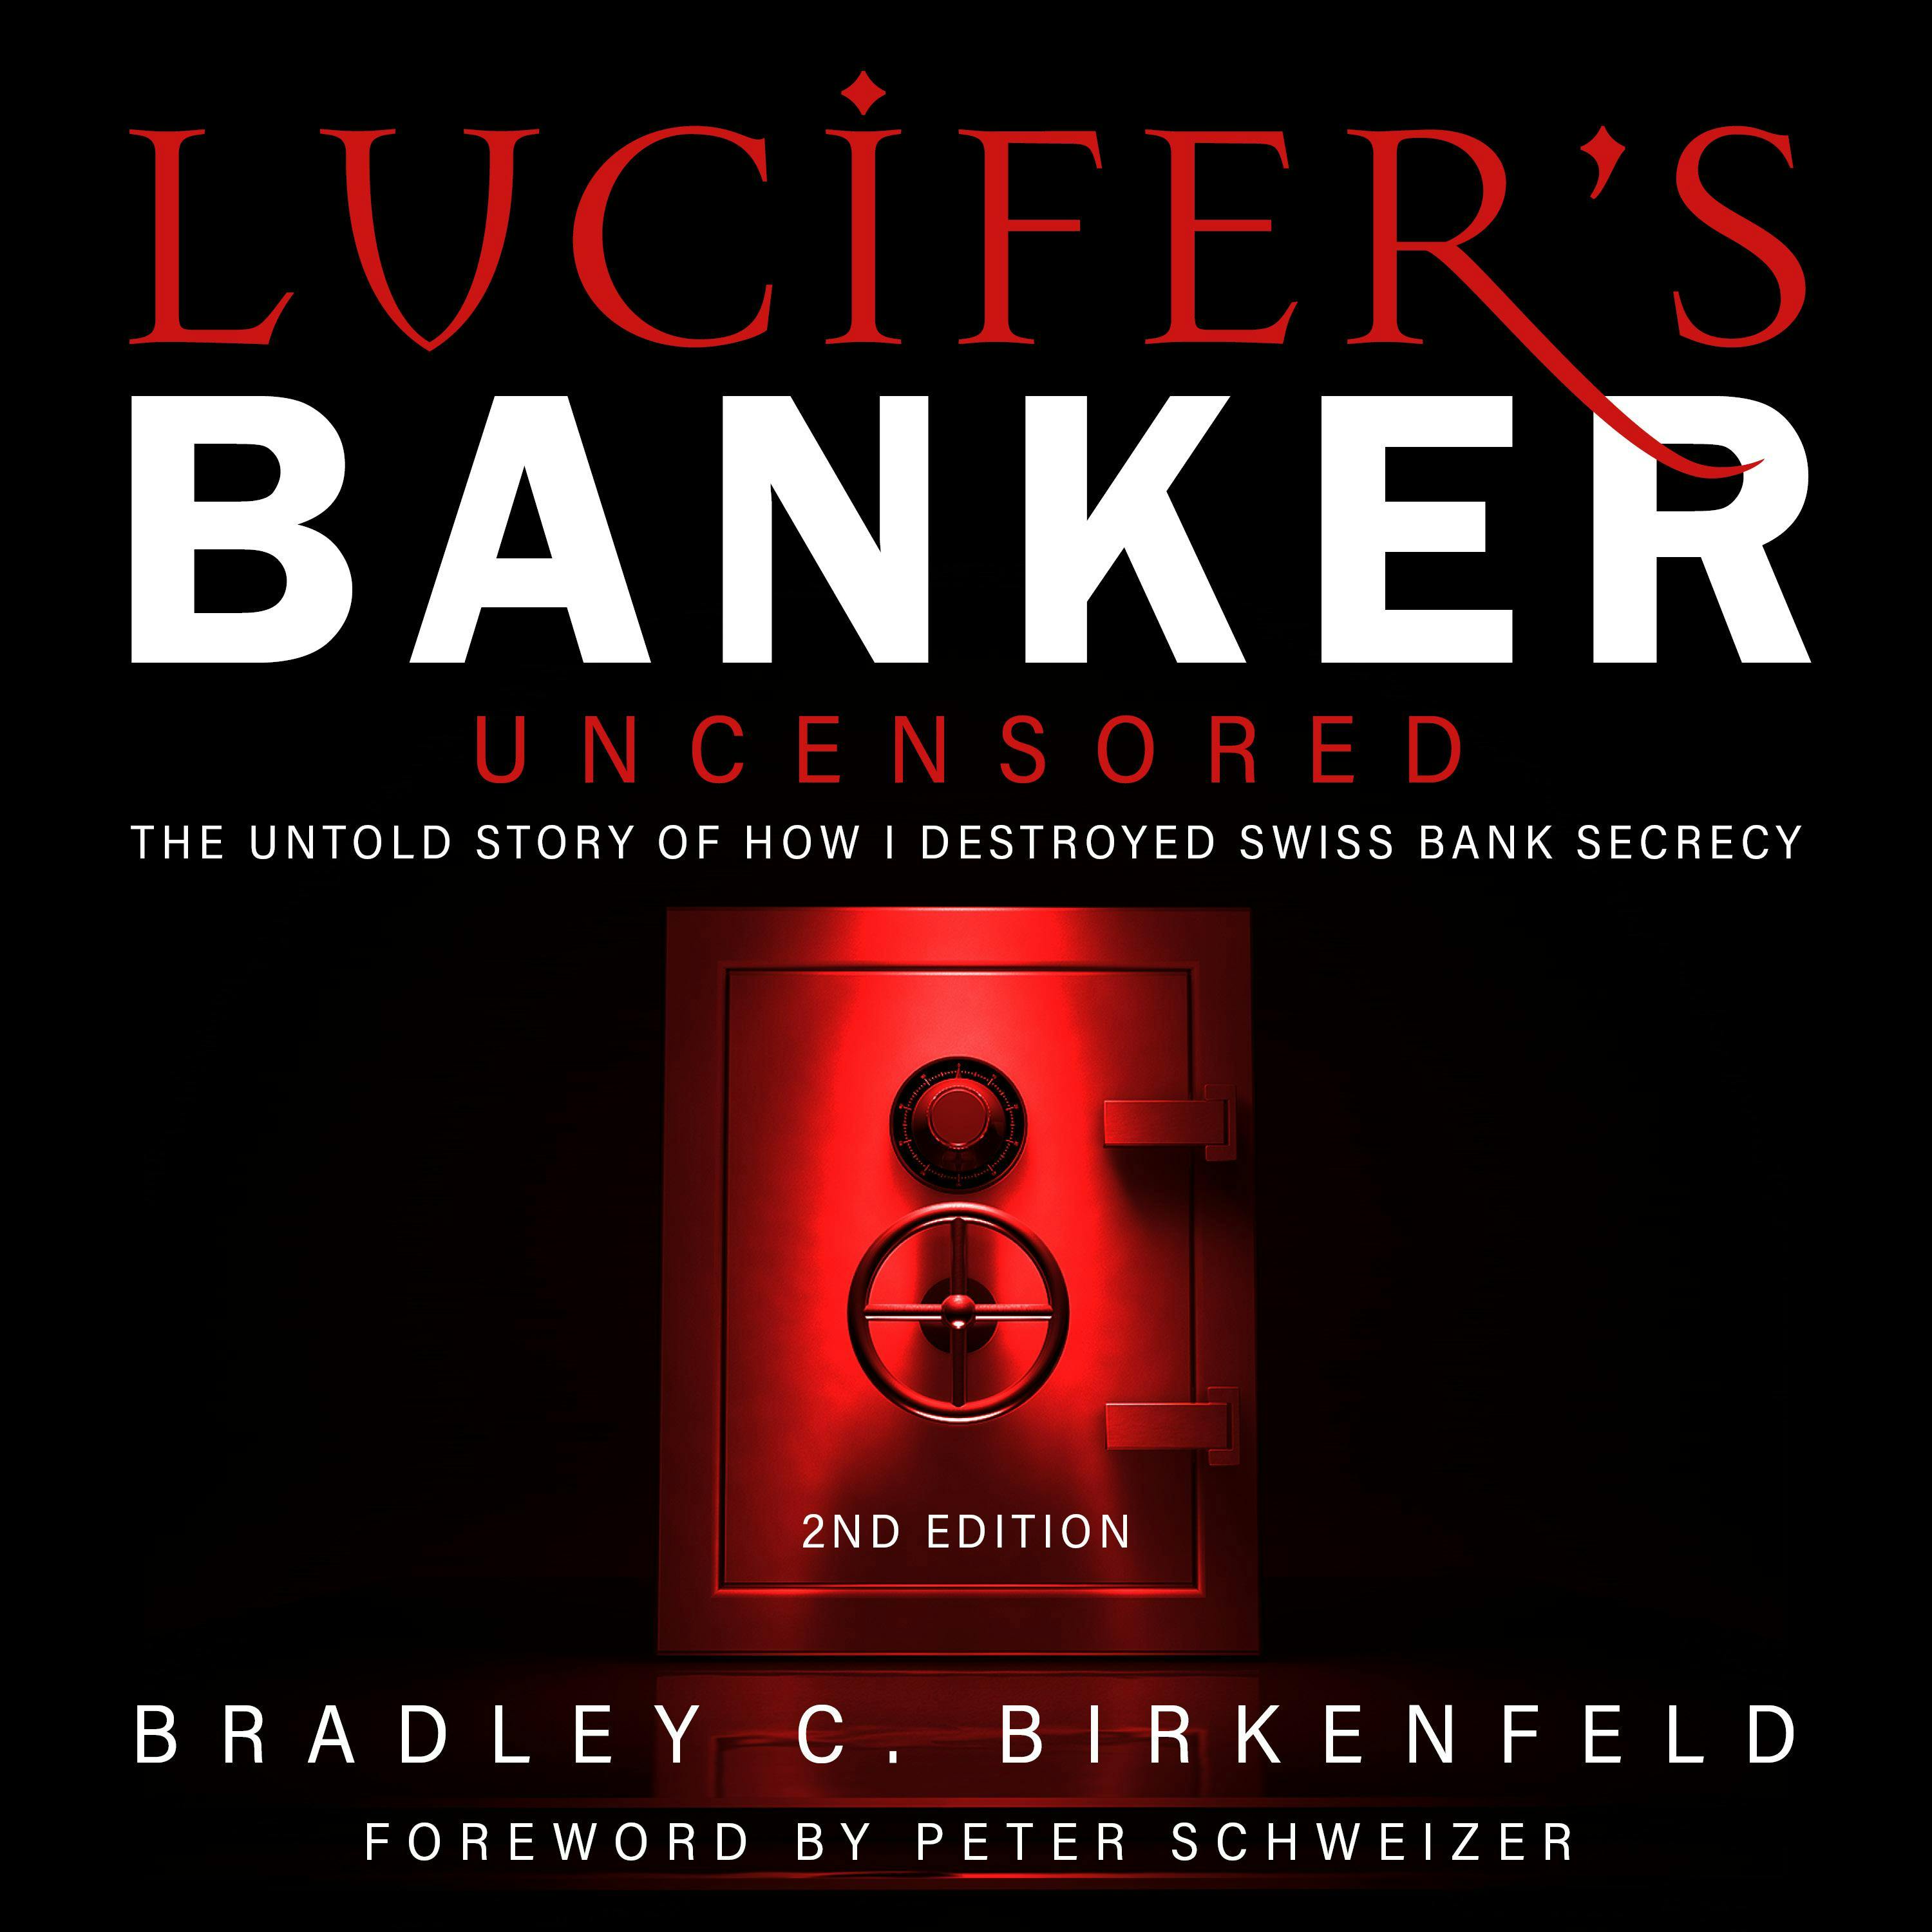 Lucifer’s Banker Uncensored: The Untold Story of How I Destroyed Swiss Bank Secrecy, 2nd Edition - Bradley C. Birkenfeld